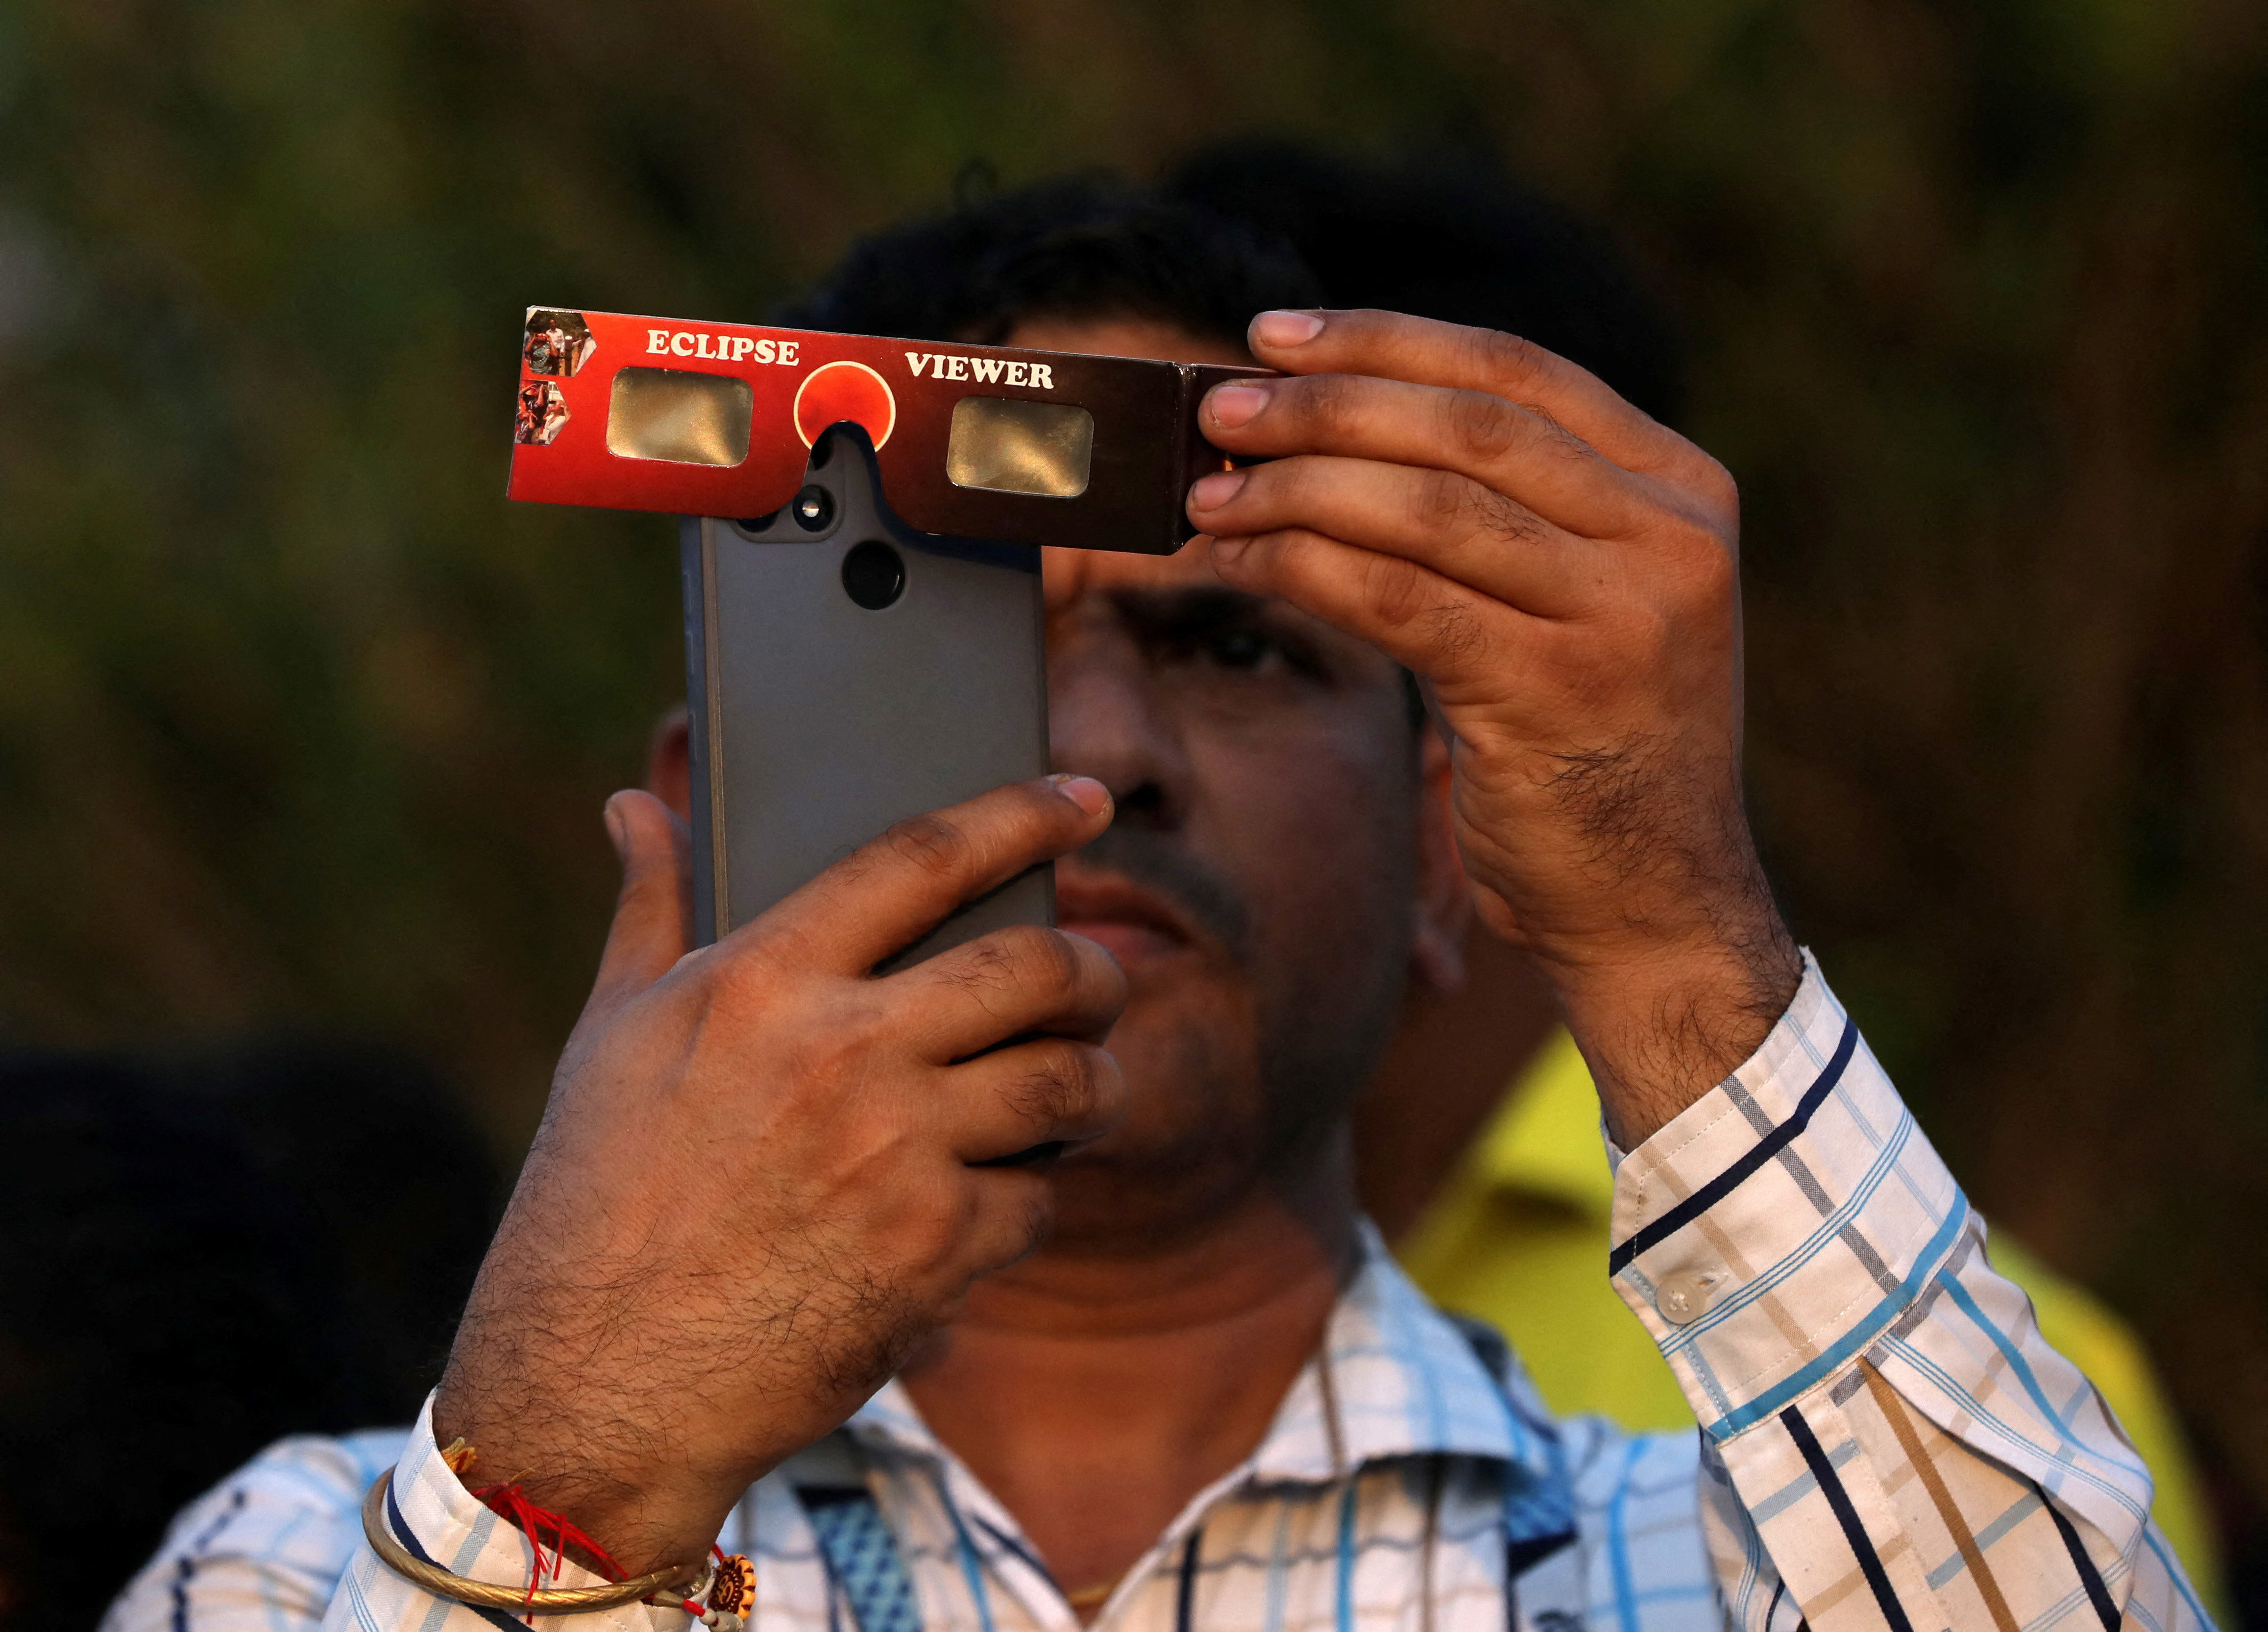 A man uses solar viewers to record a partial solar eclipse on his mobile phone in Mumbai